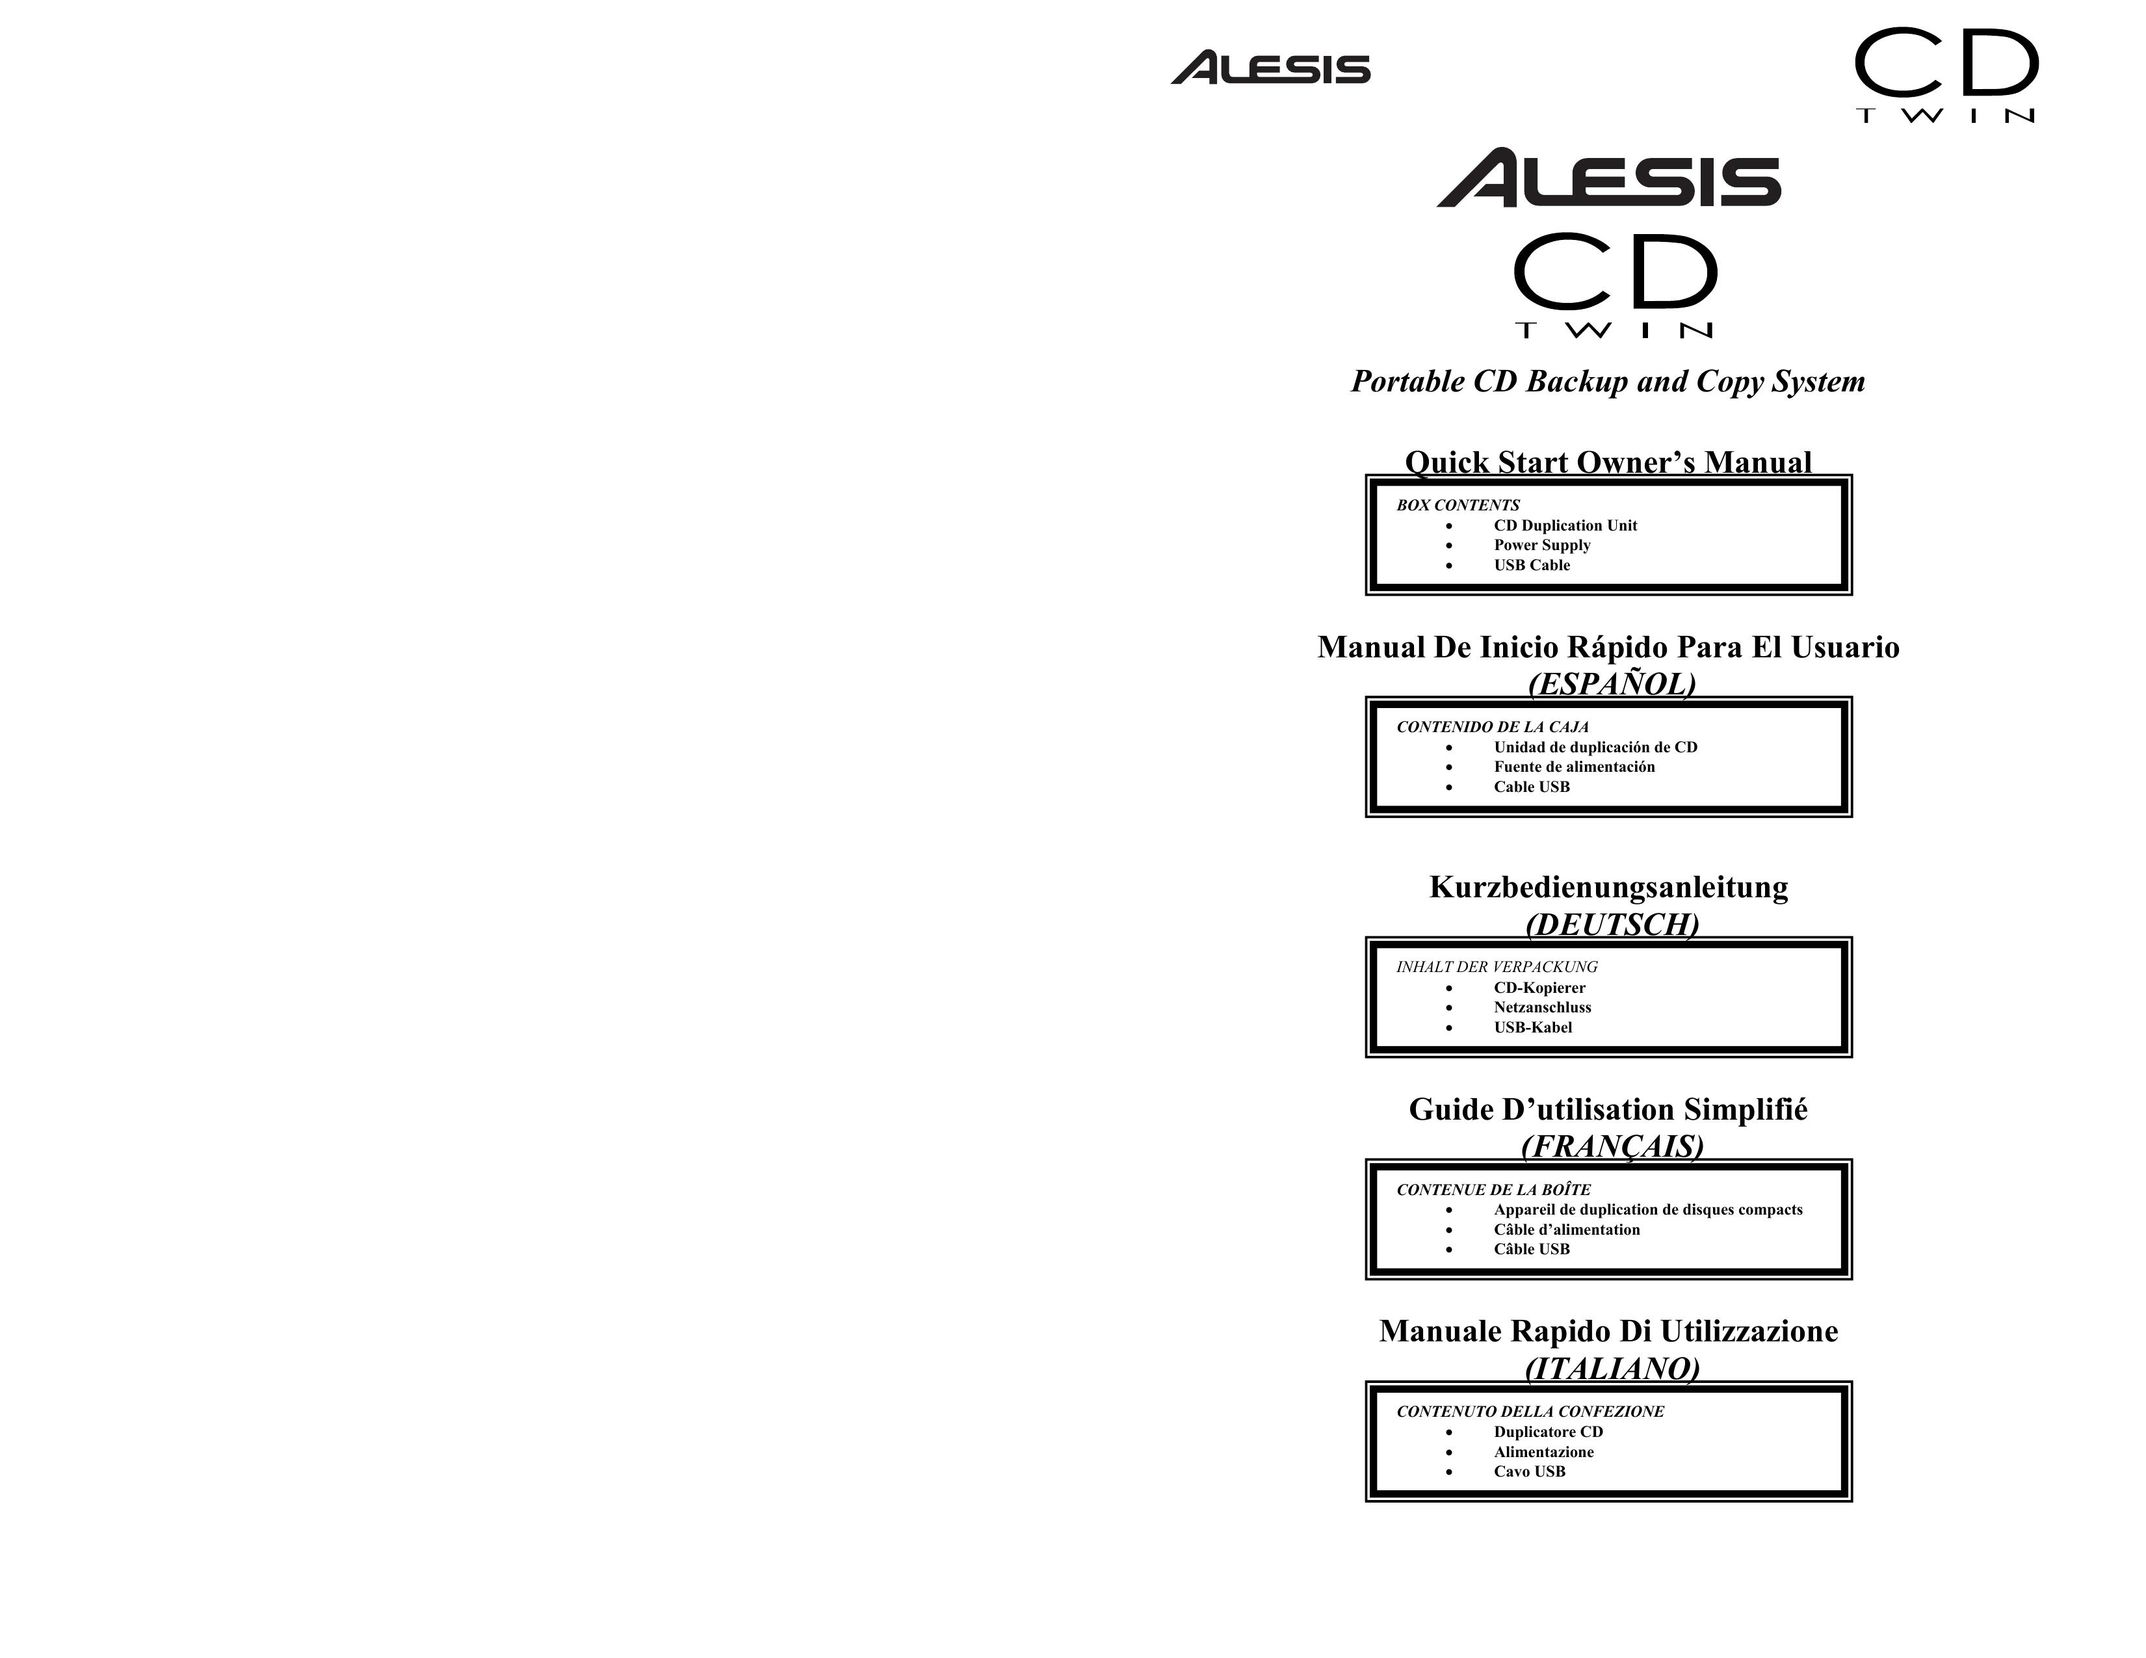 Alesis CD Twin Portable CD Backup and Copy System CD Player User Manual (Page 1)